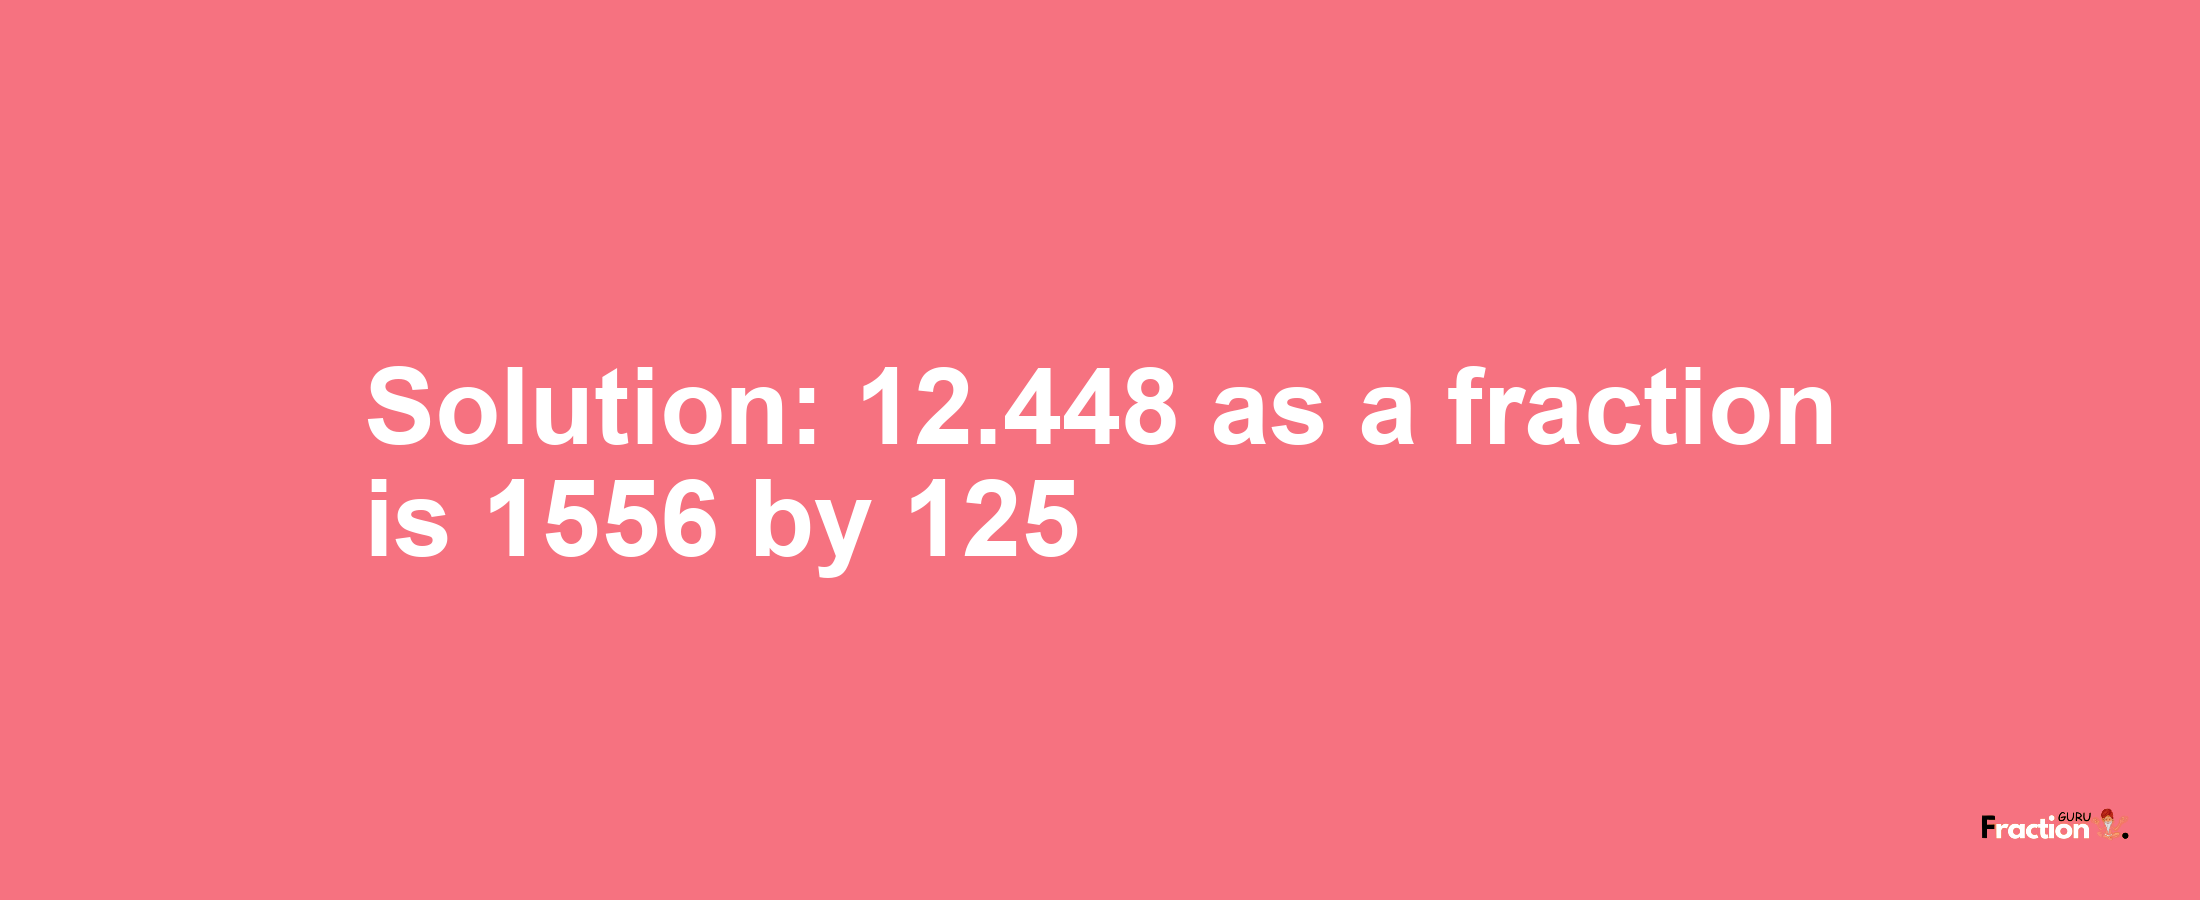 Solution:12.448 as a fraction is 1556/125